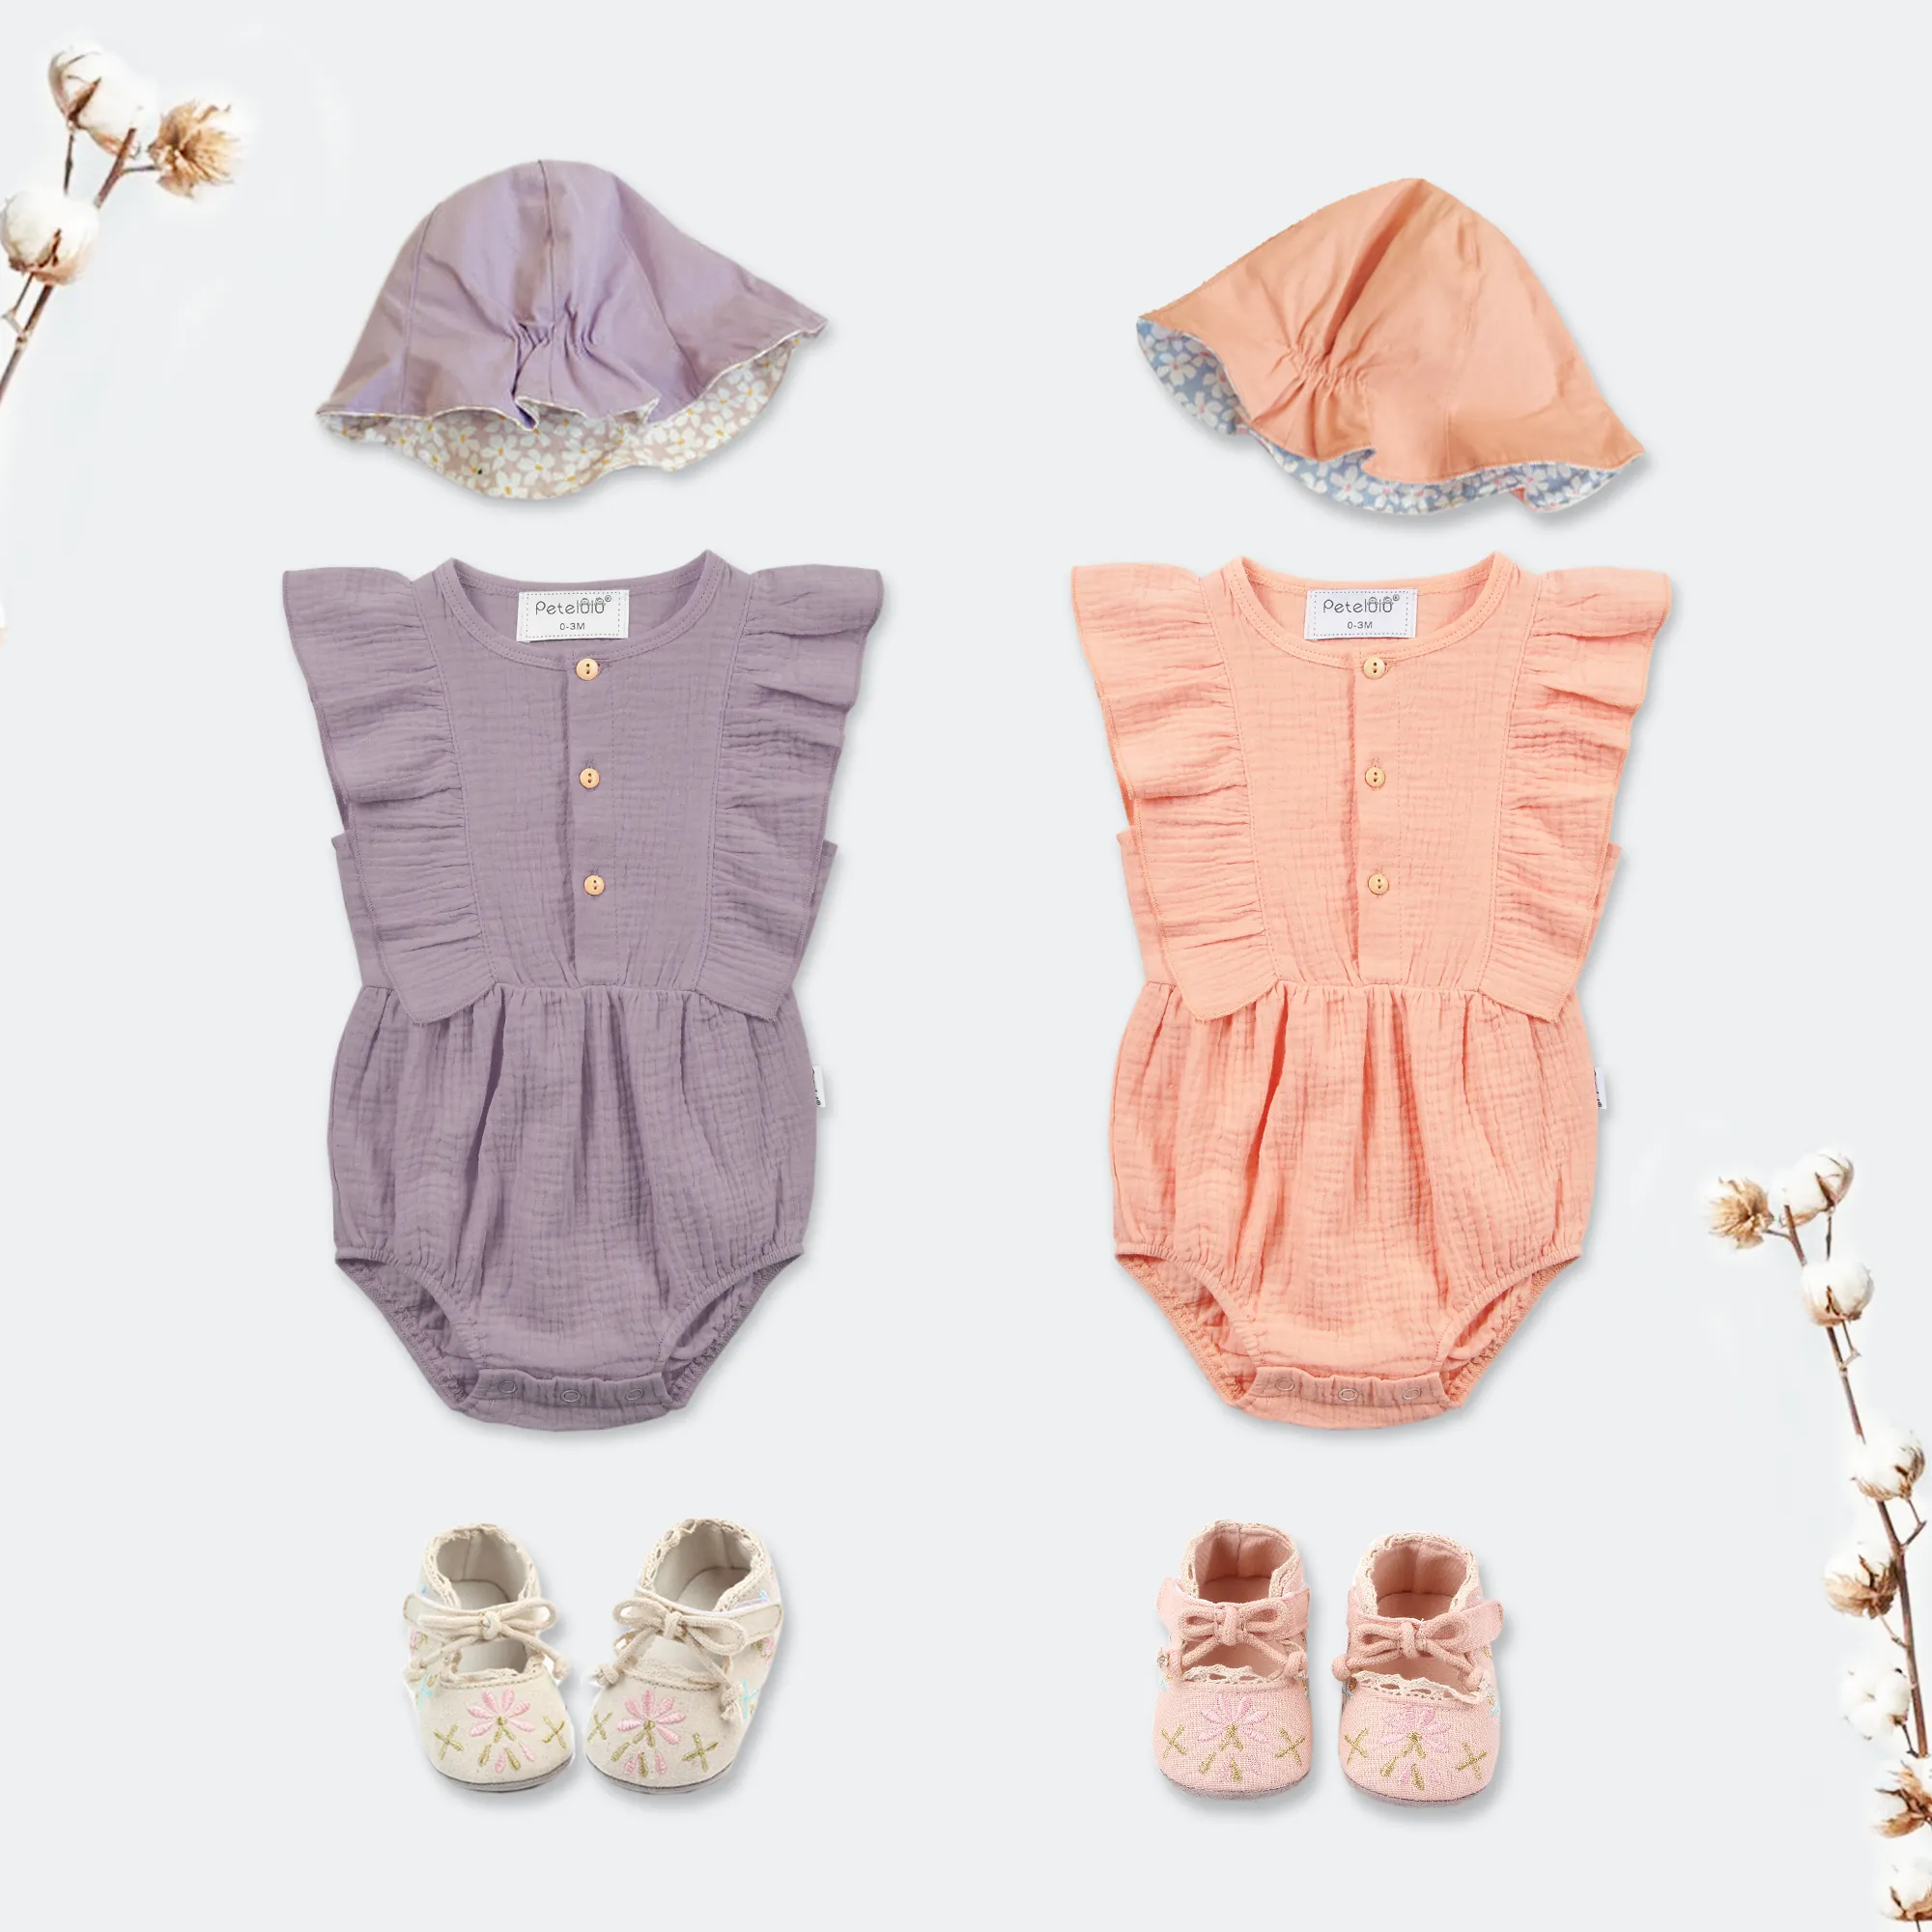 Baby Romper Baby Clothes High Quality Ruffle Flutter Solid Muslin Organic Cotton Newborn Woven Sleeveless Baby Girls 100% Cotton